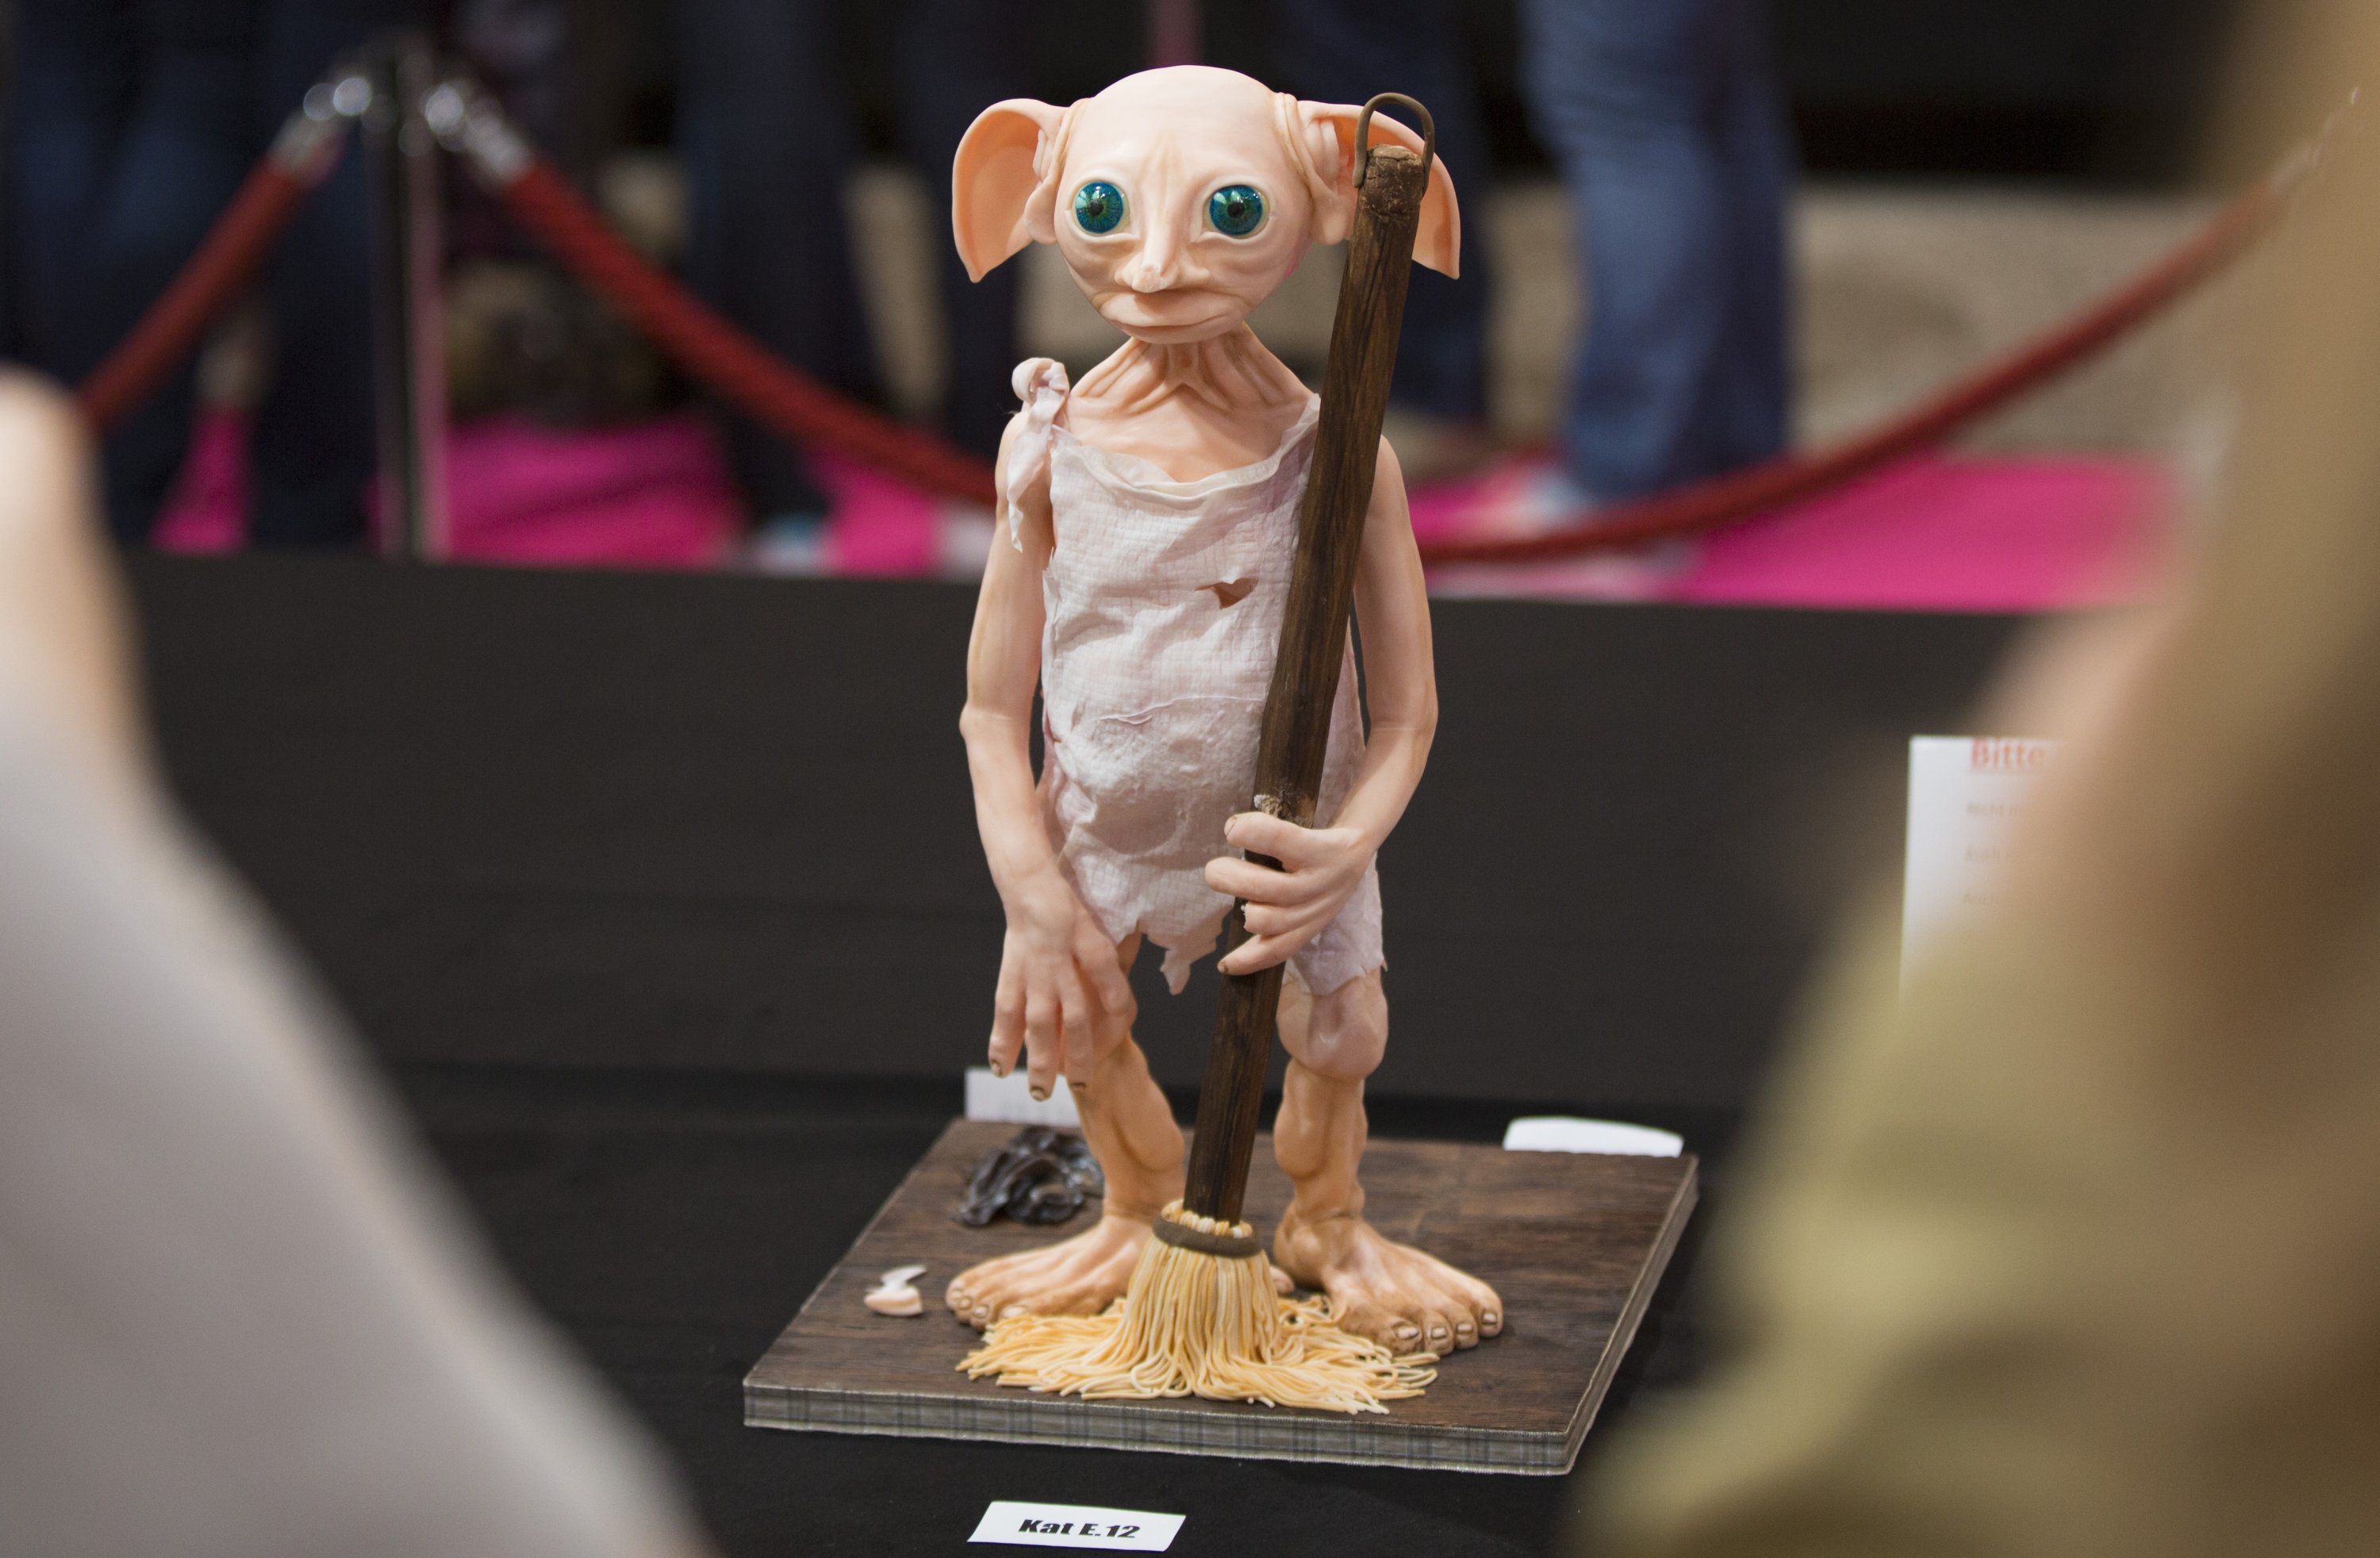 Welsh officials say Dobby's the elf's grave can stay